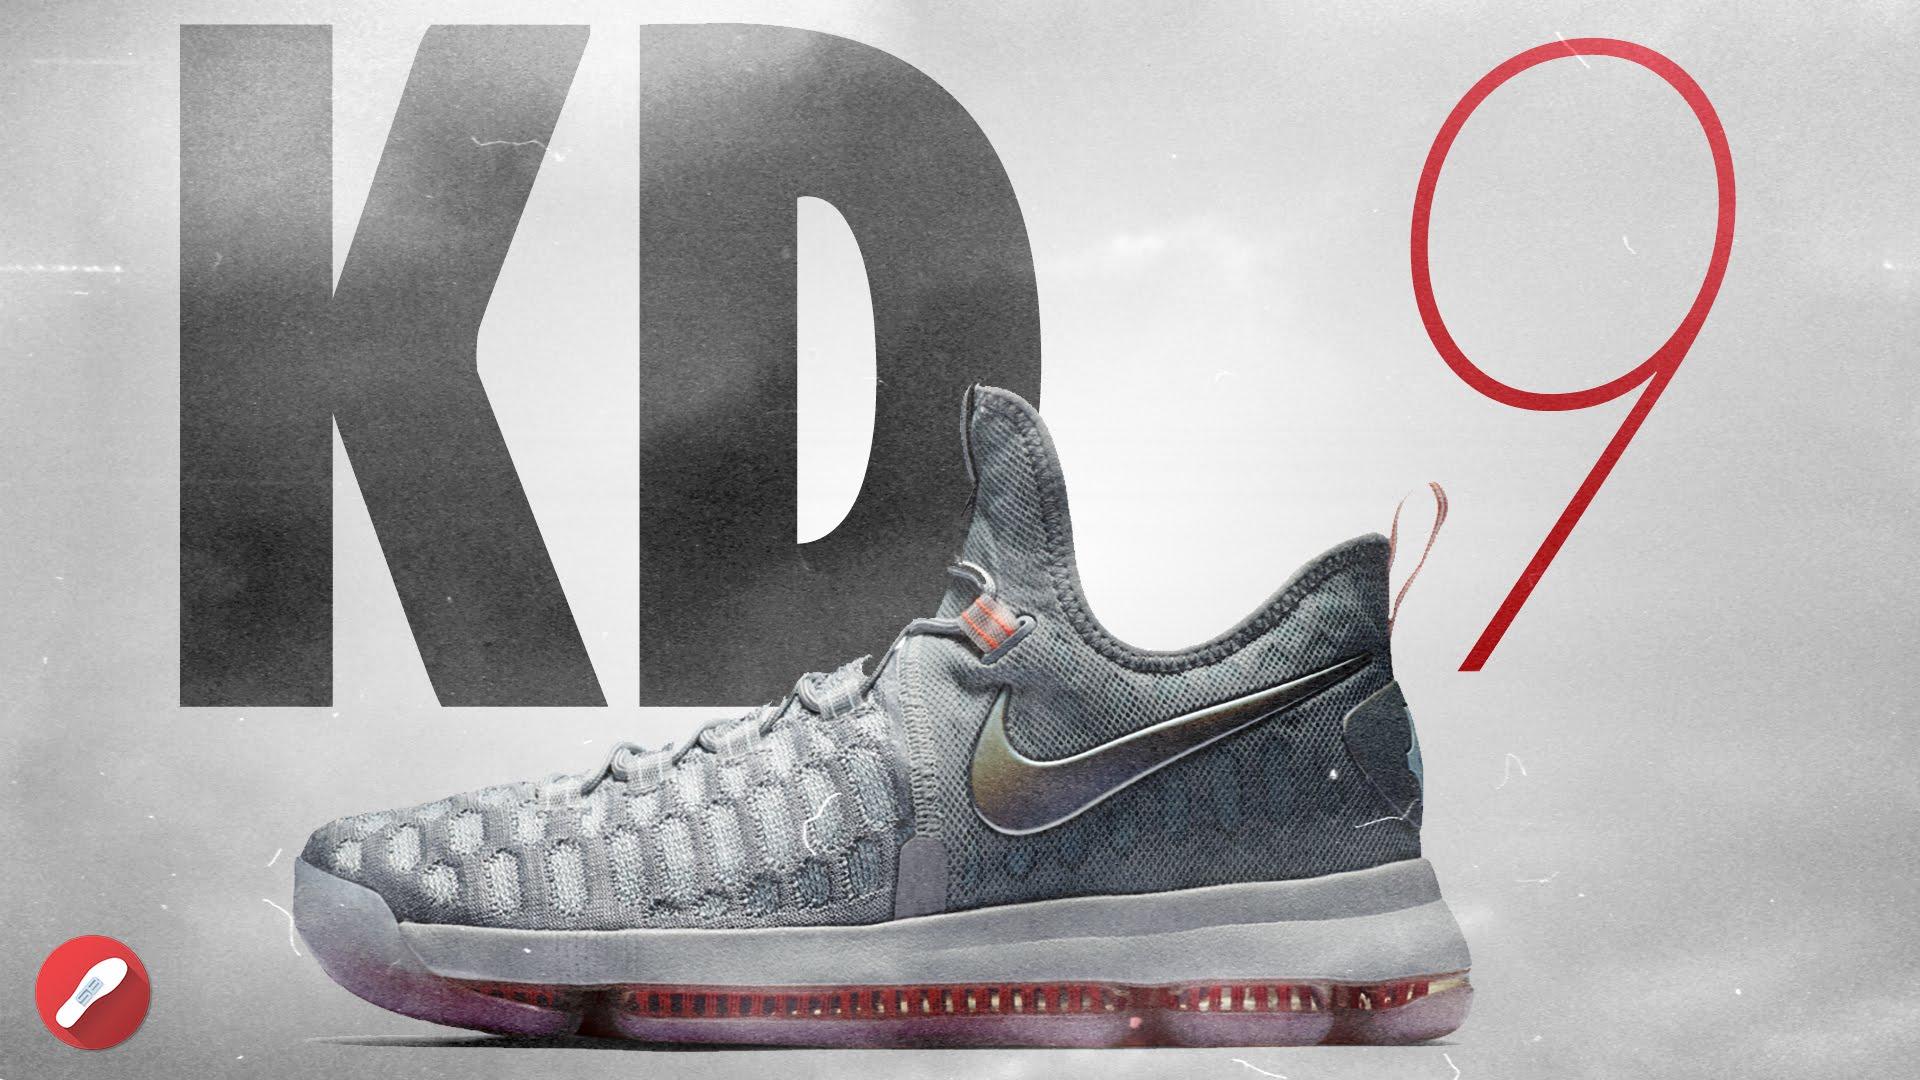 Nike Kd 9 Performance Review!